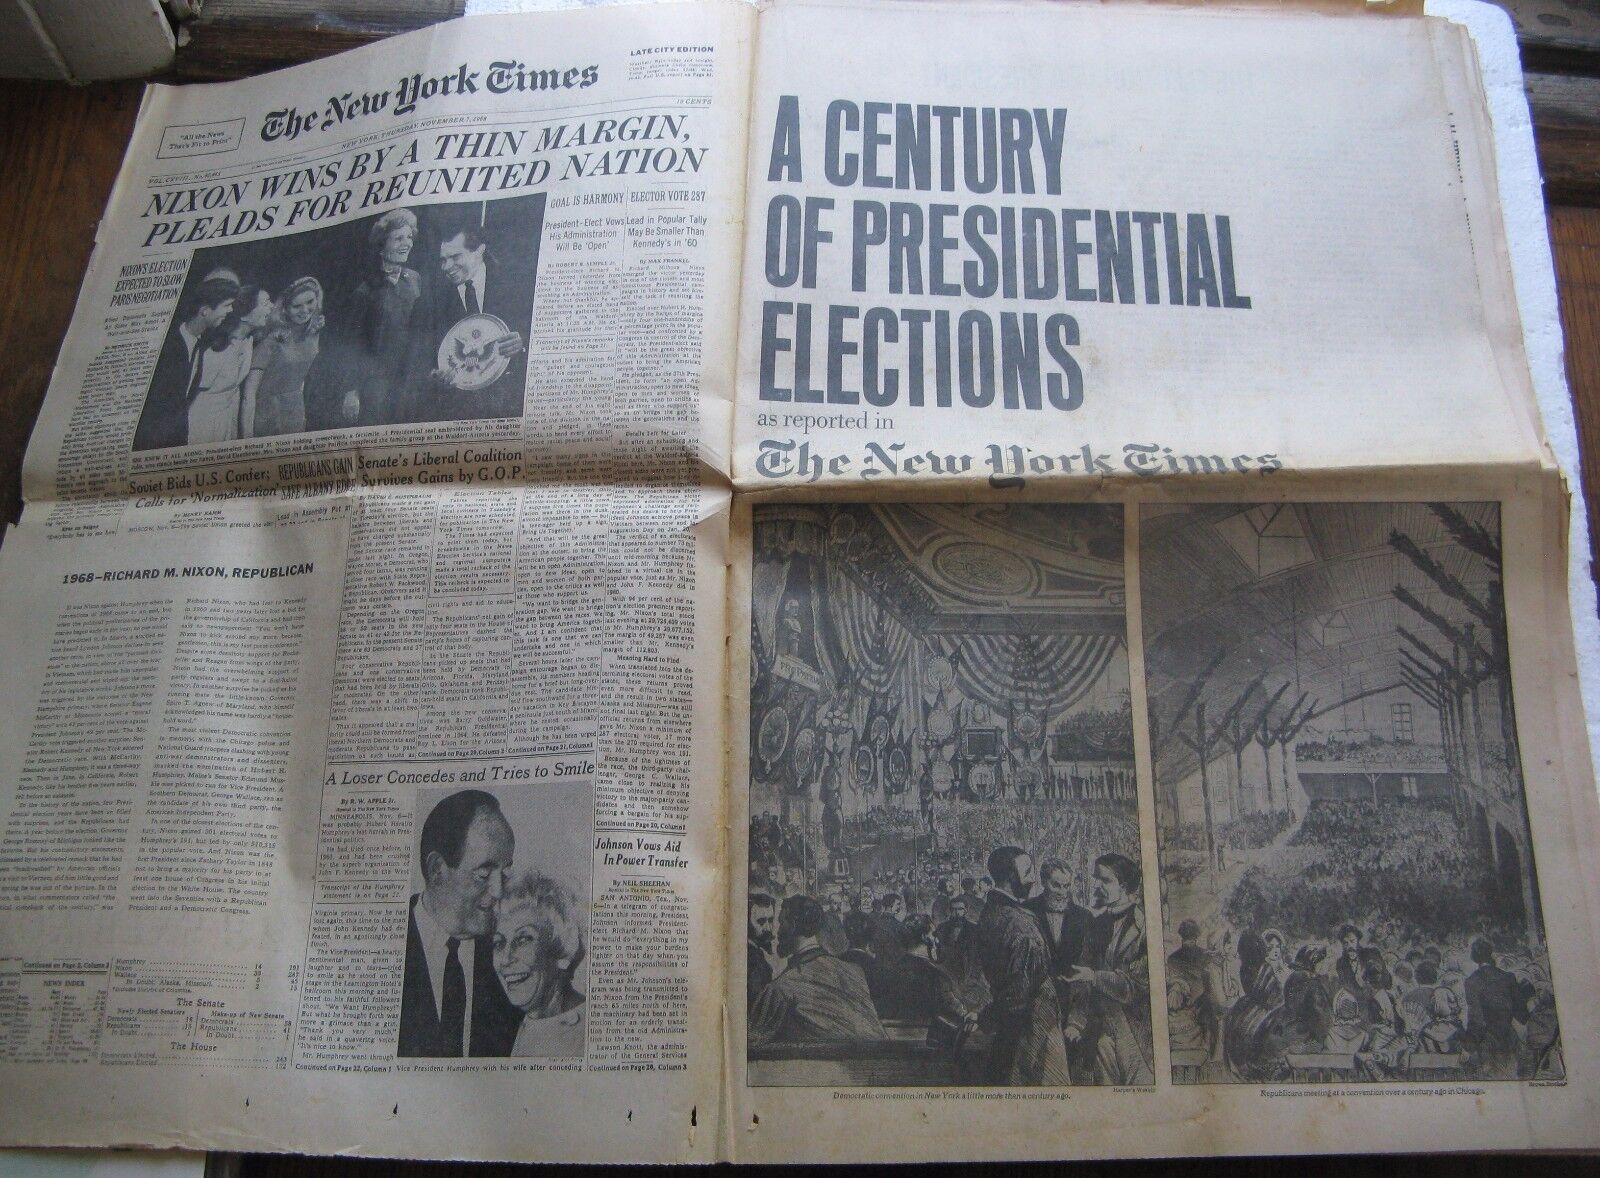 1972 New York Times Century of Presidential Elections Front Pages of Newspapers